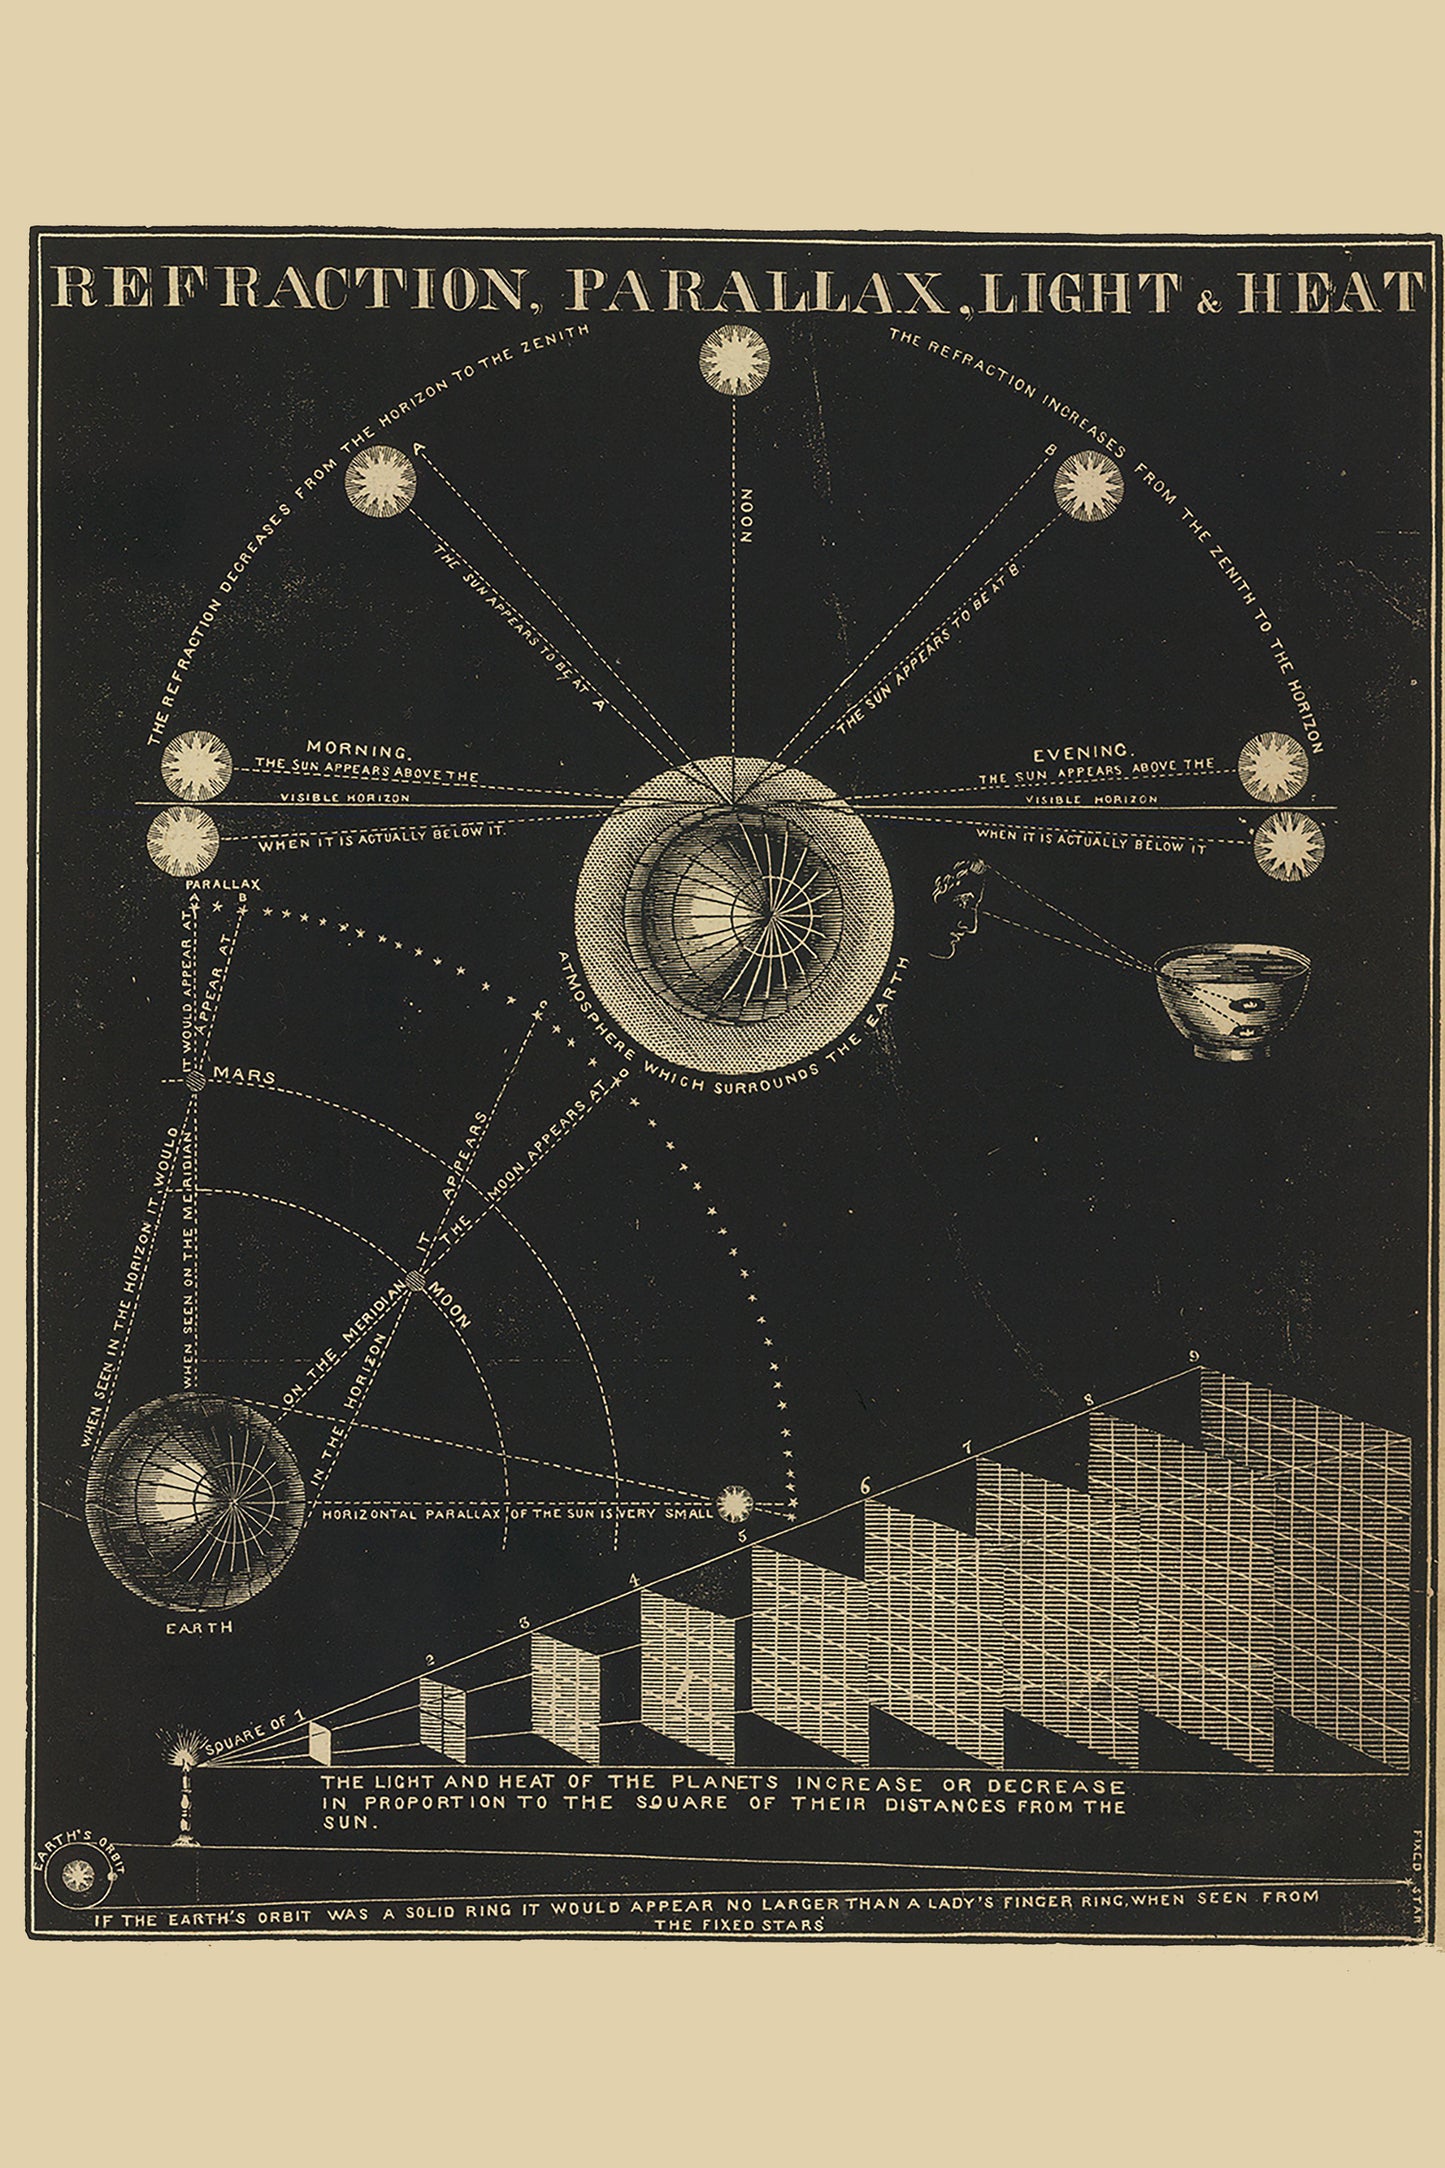 Refraction, parallax, light, heat from Smith's Illustrated Astronomy by Asa Smith, 1849 - Postcard